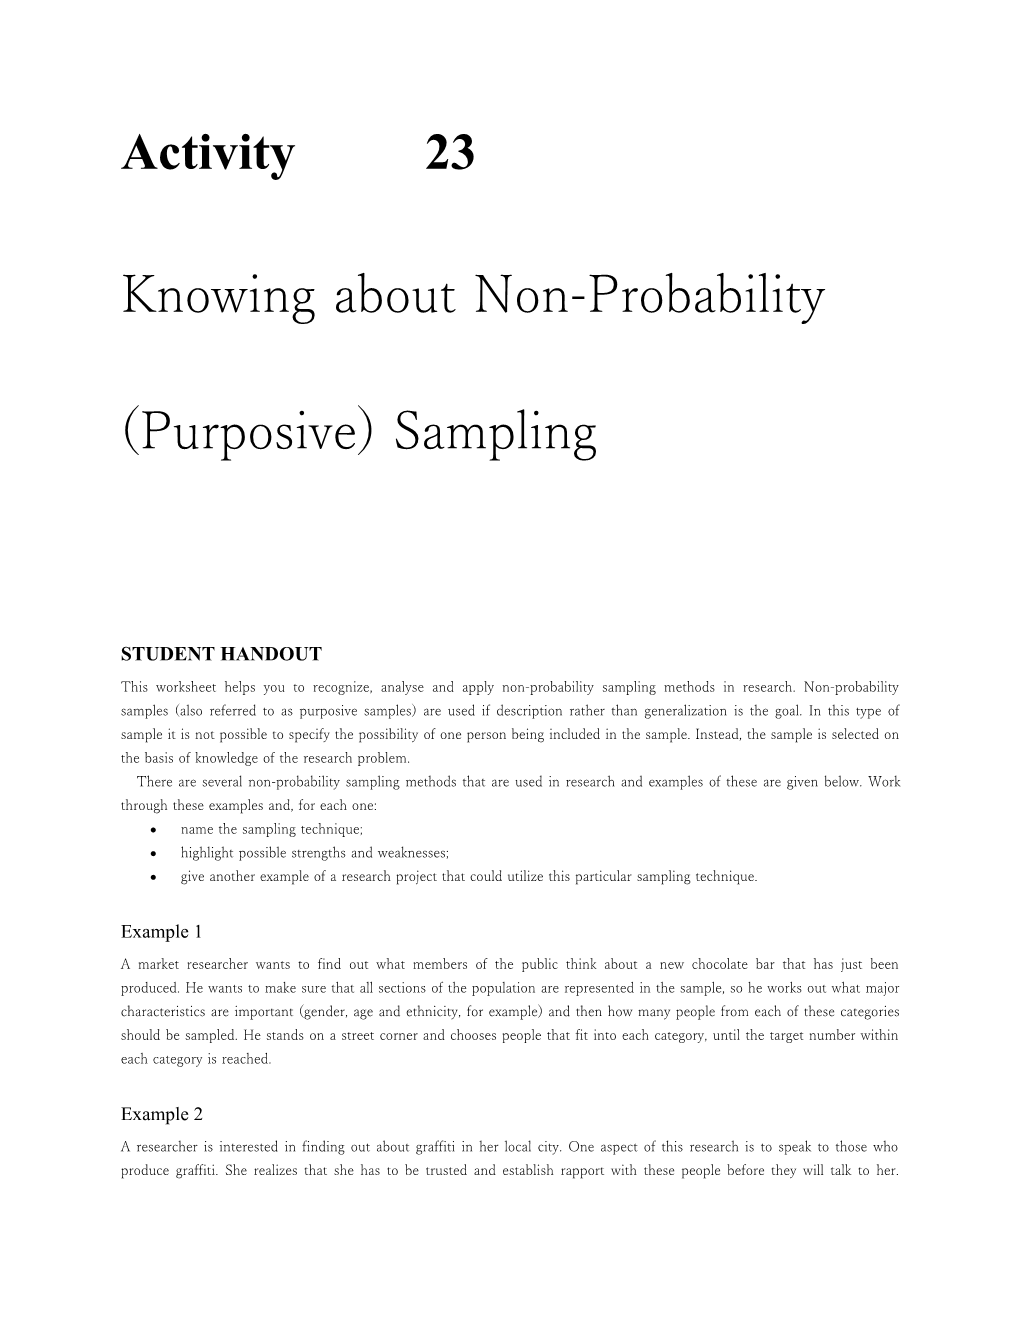 Knowing About Non-Probability (Purposive) Sampling